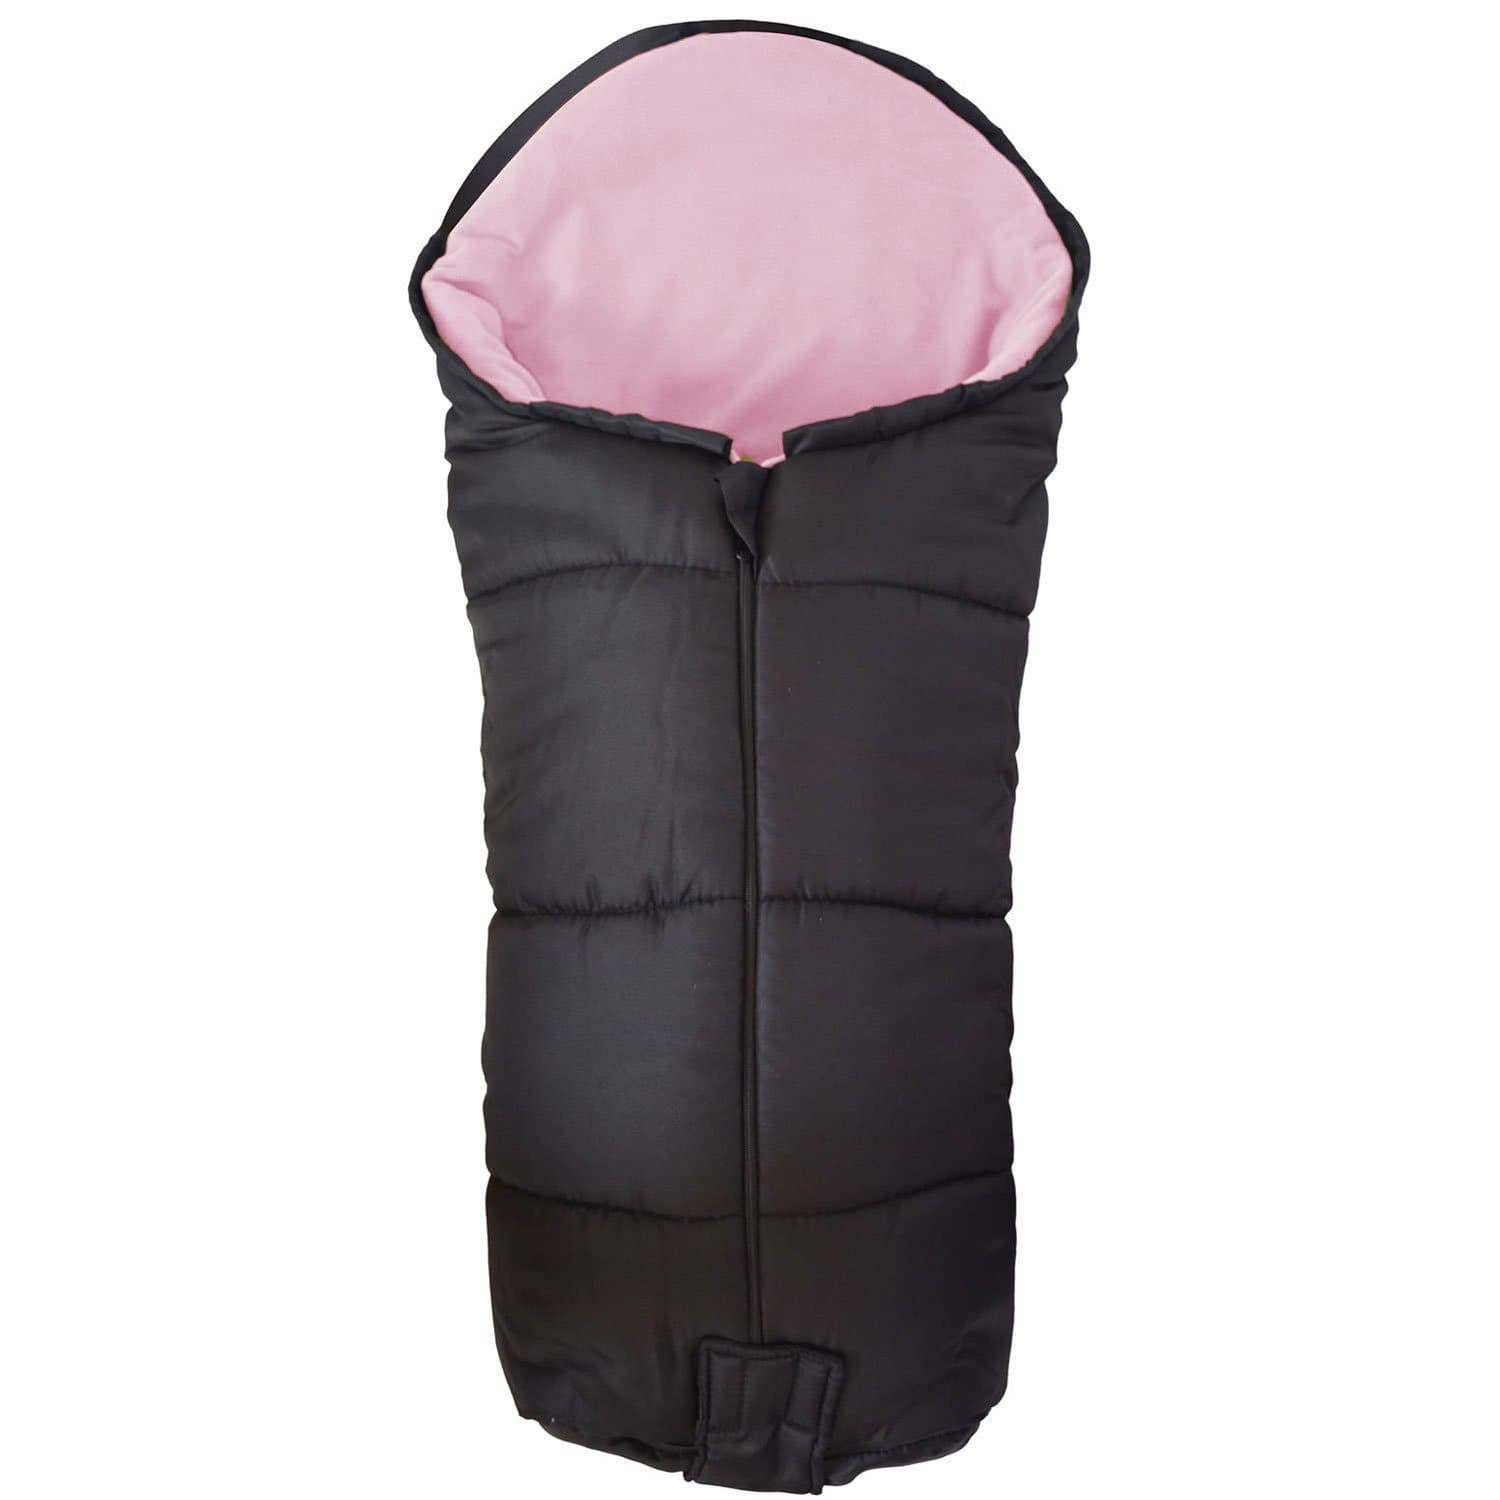 Deluxe Footmuff / Cosy Toes Compatible with Easywalker - Light Pink / Fits All Models | For Your Little One